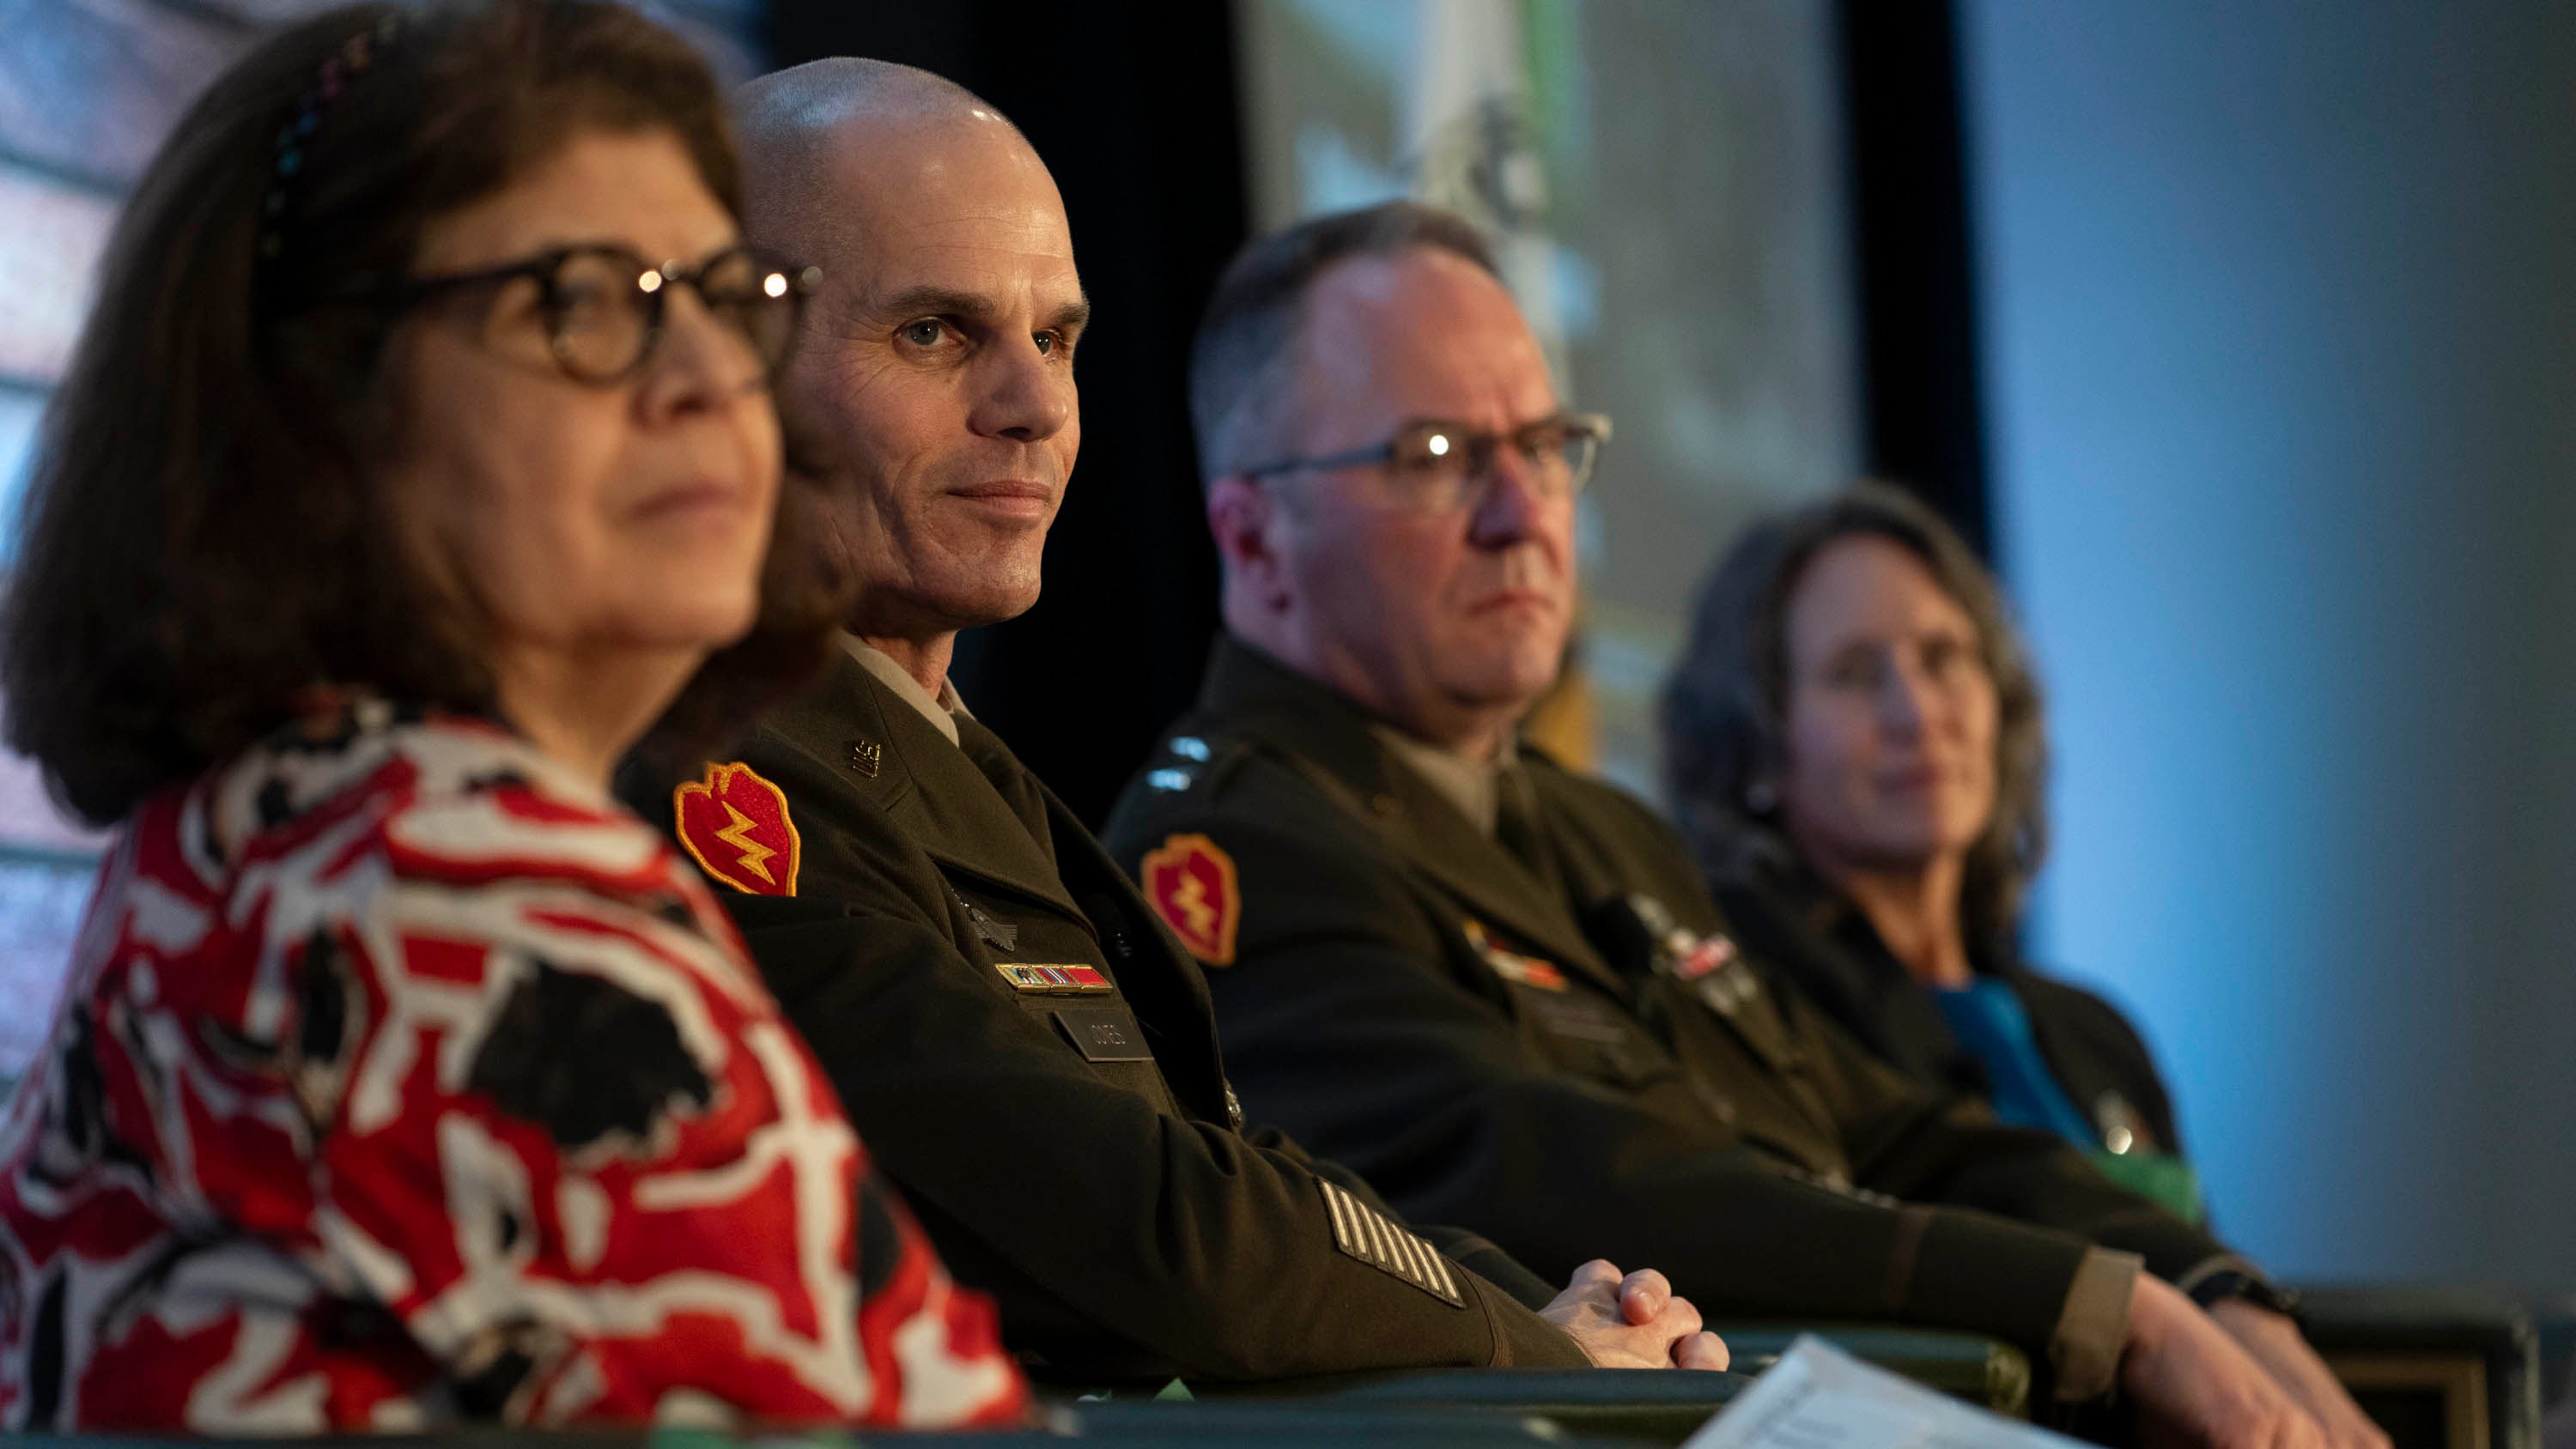 LTG Omar J. Jones IV, commanding general of Installation Management Command, attends the AUSA Contemporary Military Forum: Taking Care of People session at the AUSA 2023 Annual Meeting in Washington, D.C., Wednesday, Oct. 11, 2023. (Carol Guzy for AUSA)